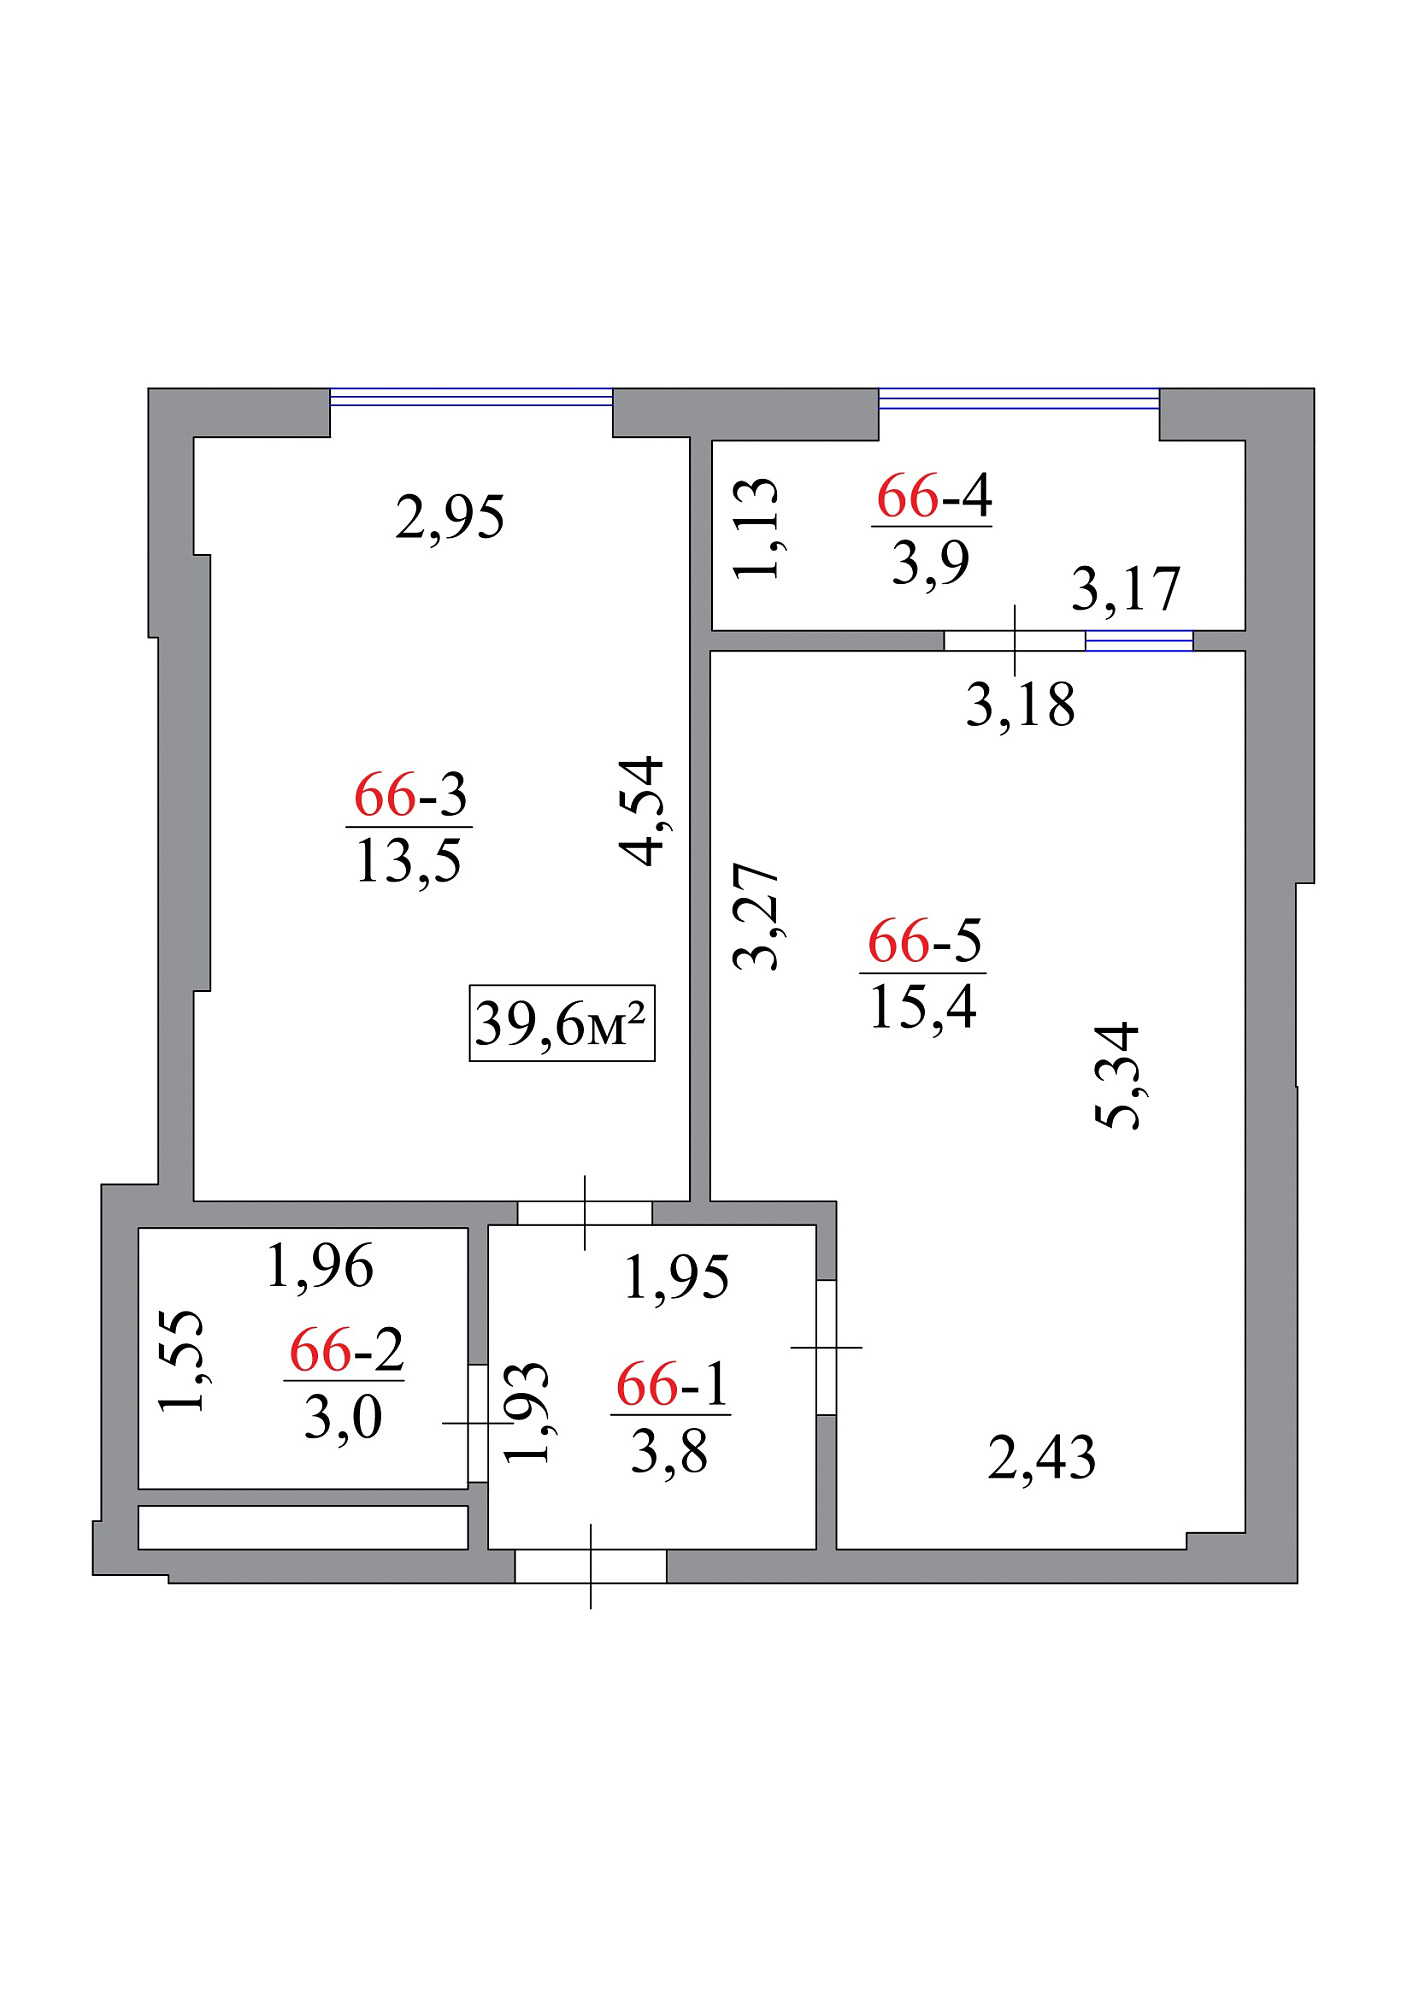 Planning 1-rm flats area 39.6m2, AB-07-07/00060.